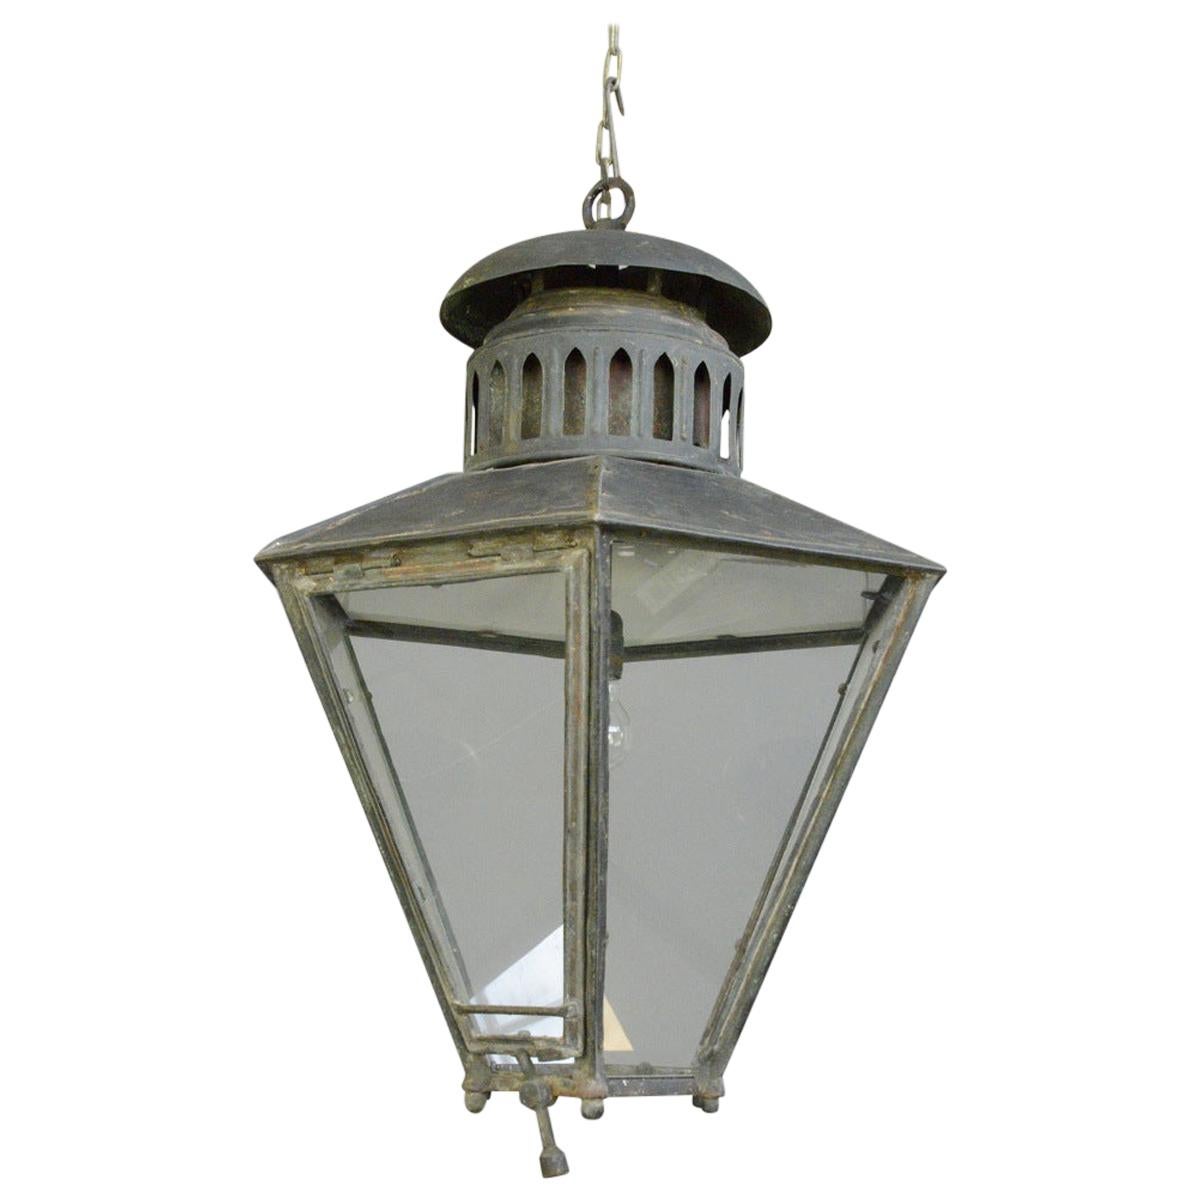 Large Victorian Lantern by Bray & Co. Leeds